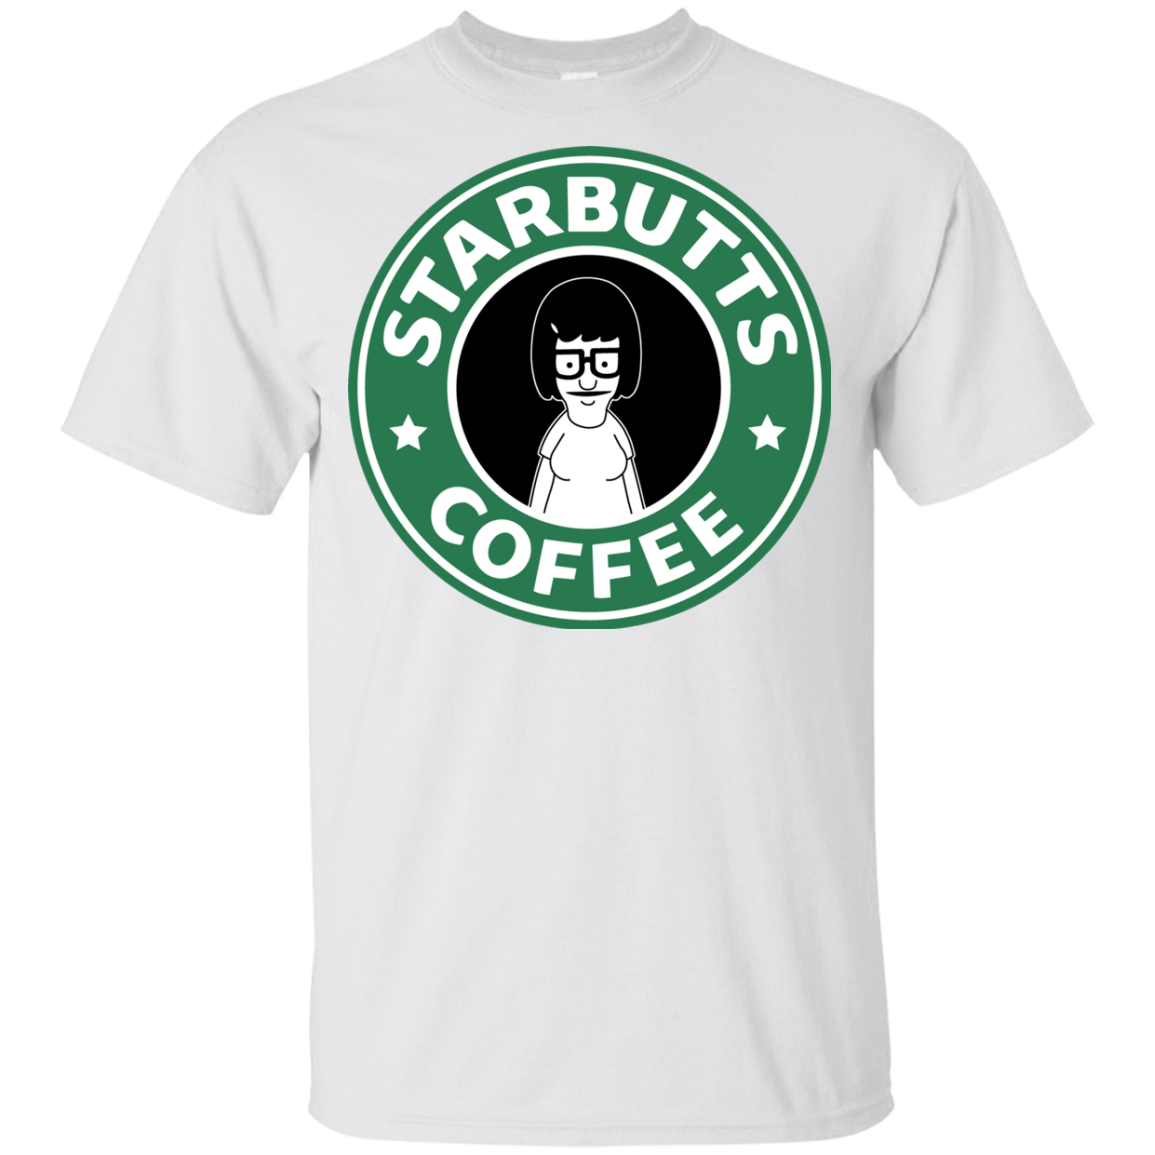 Starbutts Youth T-Shirt